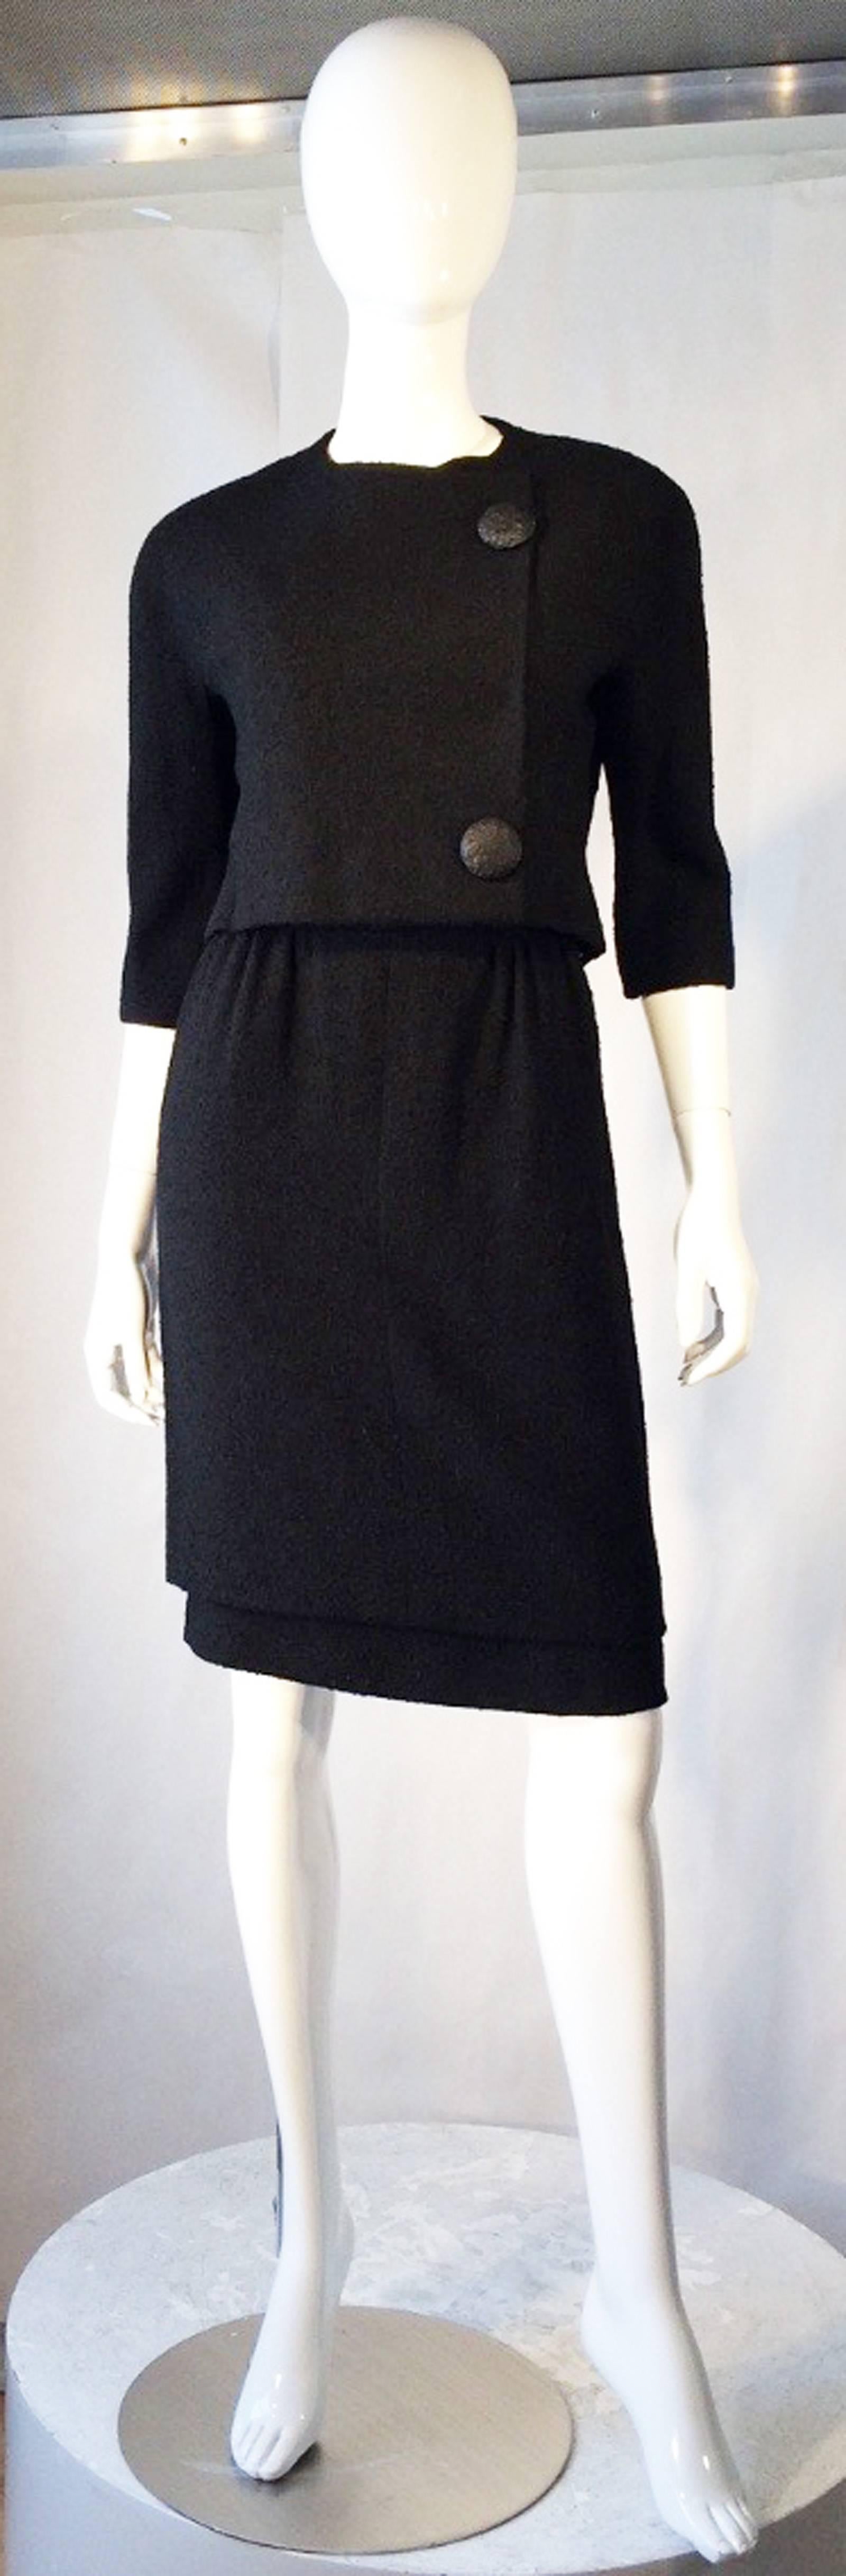 A fine and rare vintage Balenciaga haute couture dress suit. Authentic numbered and documented item retains original hand written Balenciaga order receipt dated 1957. Jet black 2pc. wool frise fabric items feature precision seams with original